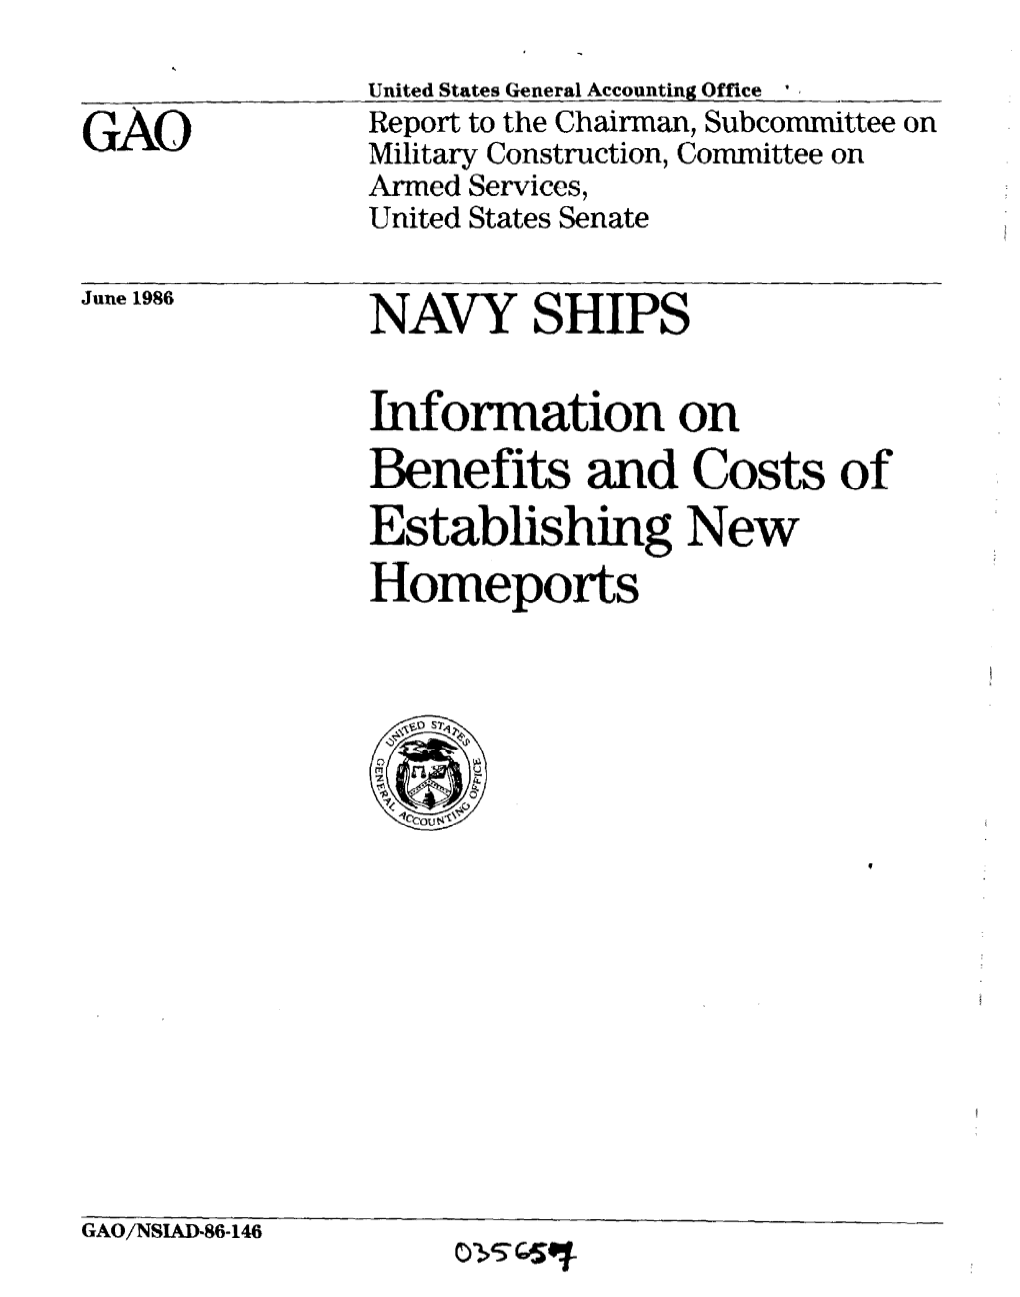 Information on Benefits and Costs of Establishing New Homeports